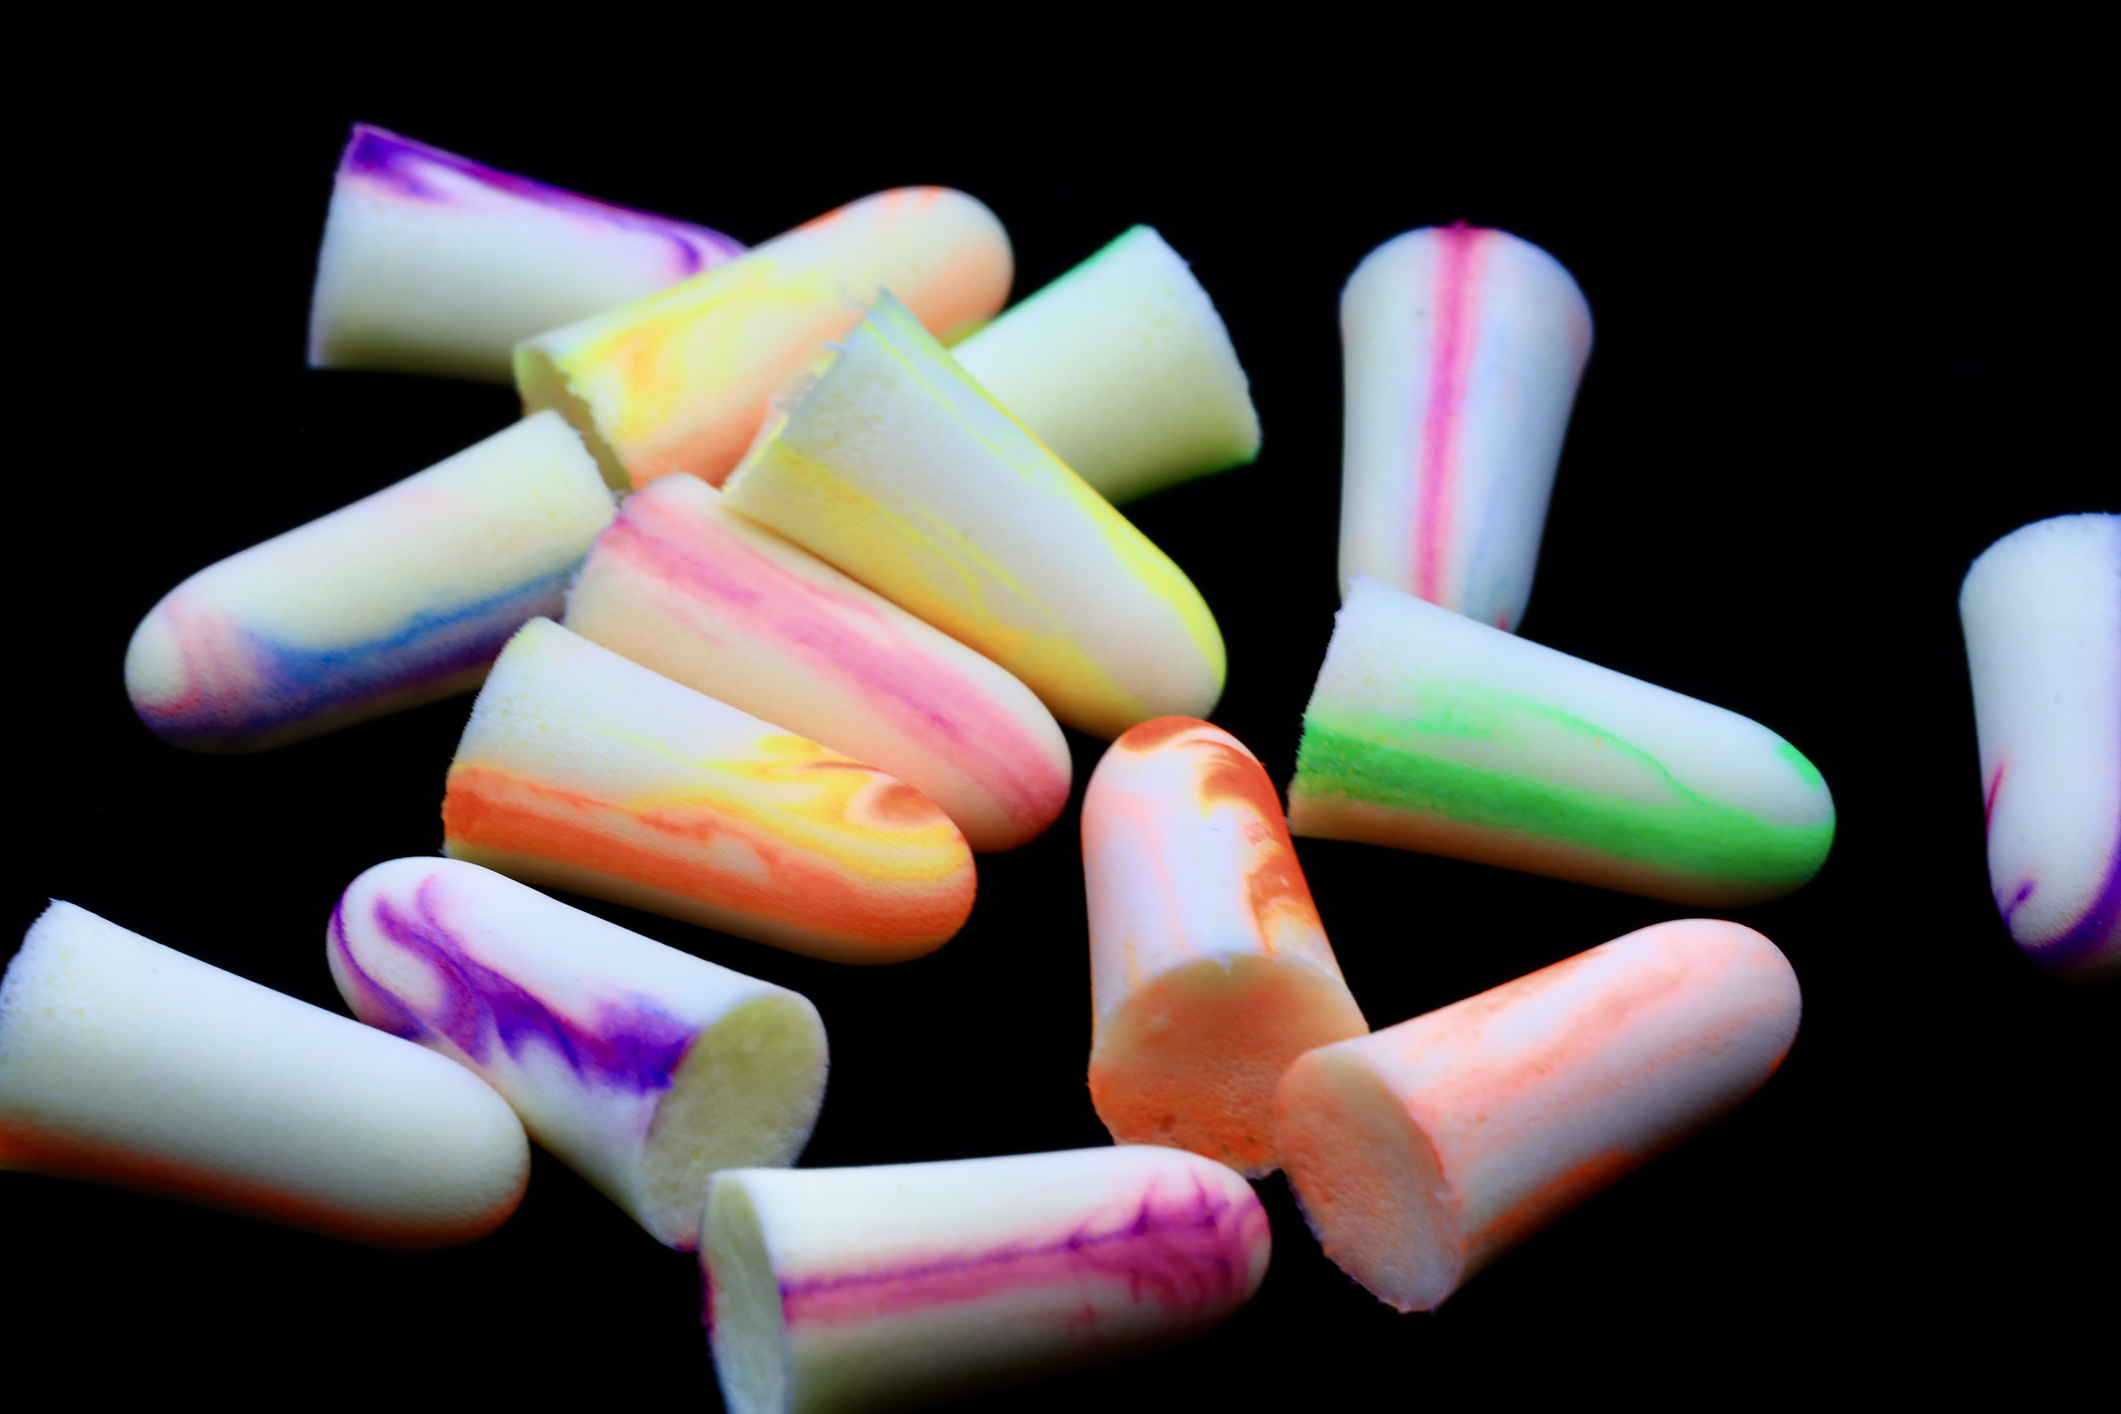 Assorted colorful earplugs scattered on a black background